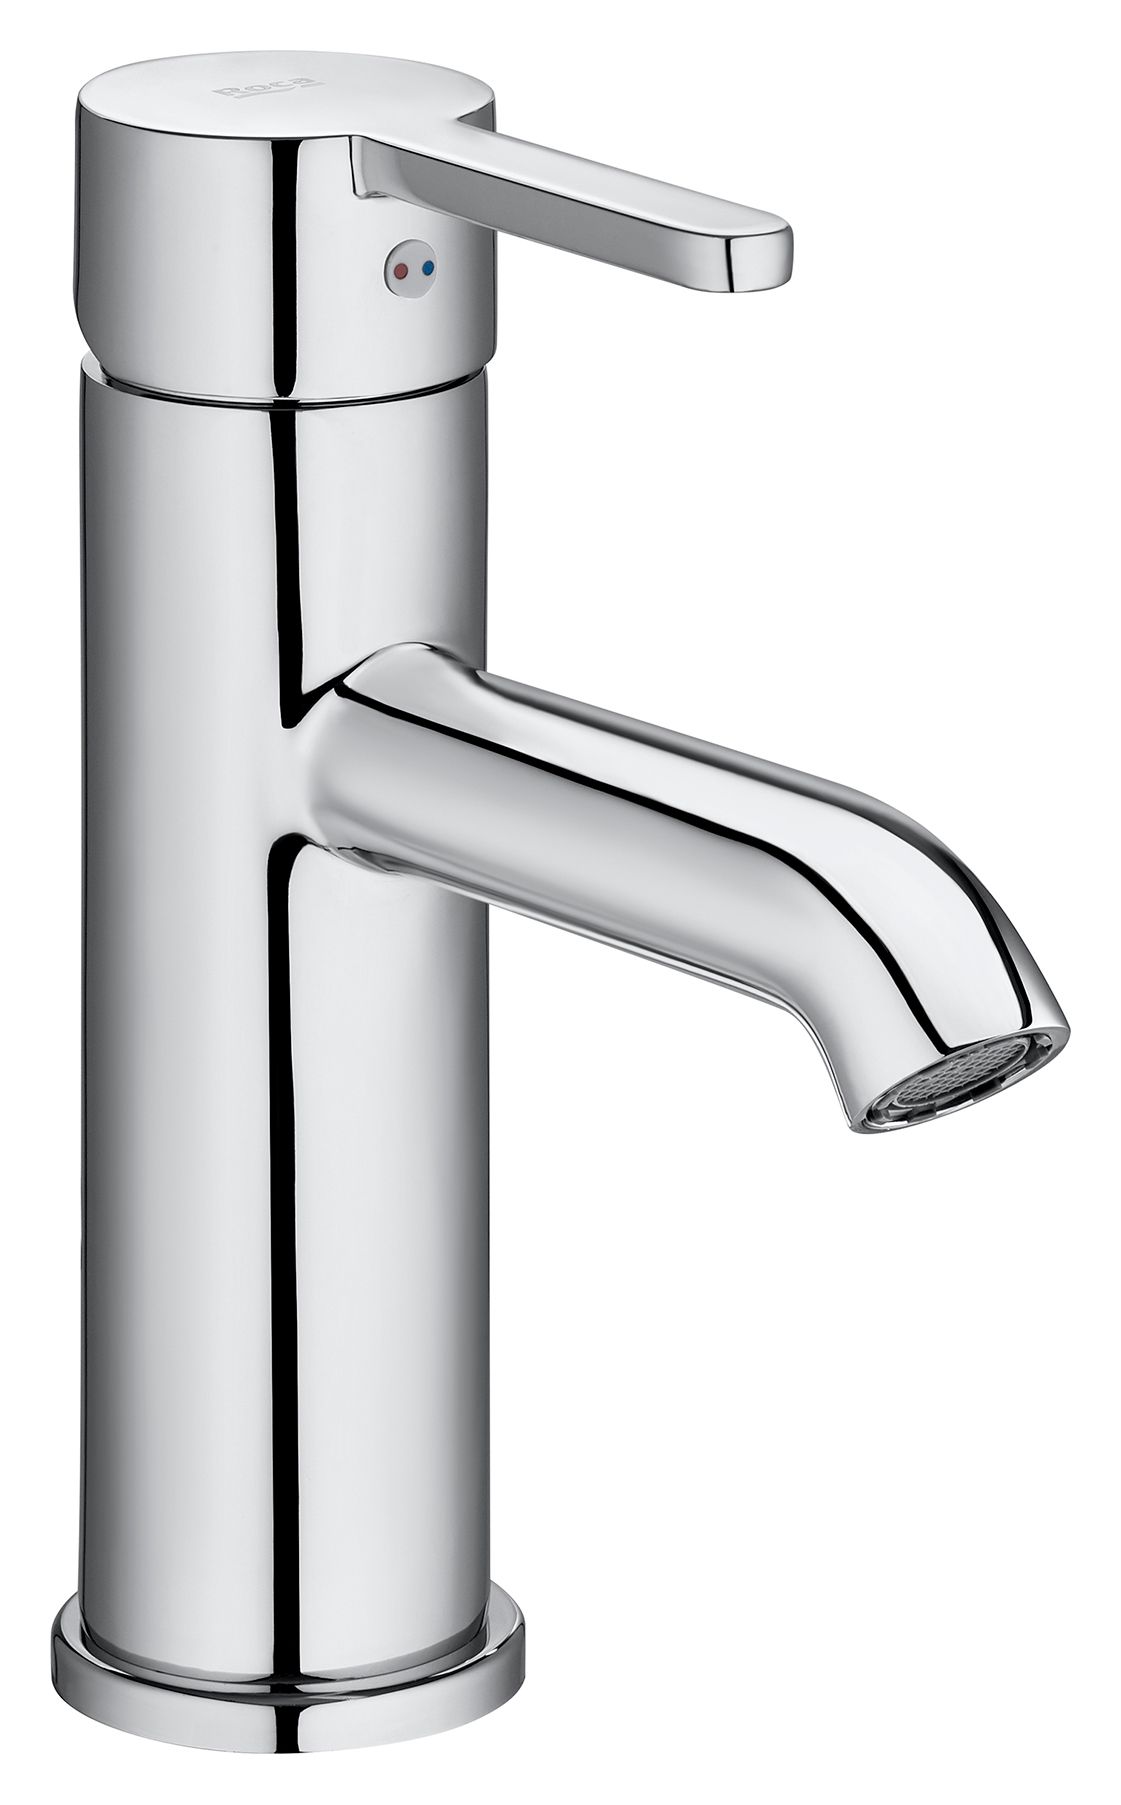 Image of Roca Carelia Basin Mixer Tap with Cold Start Technology - Chrome